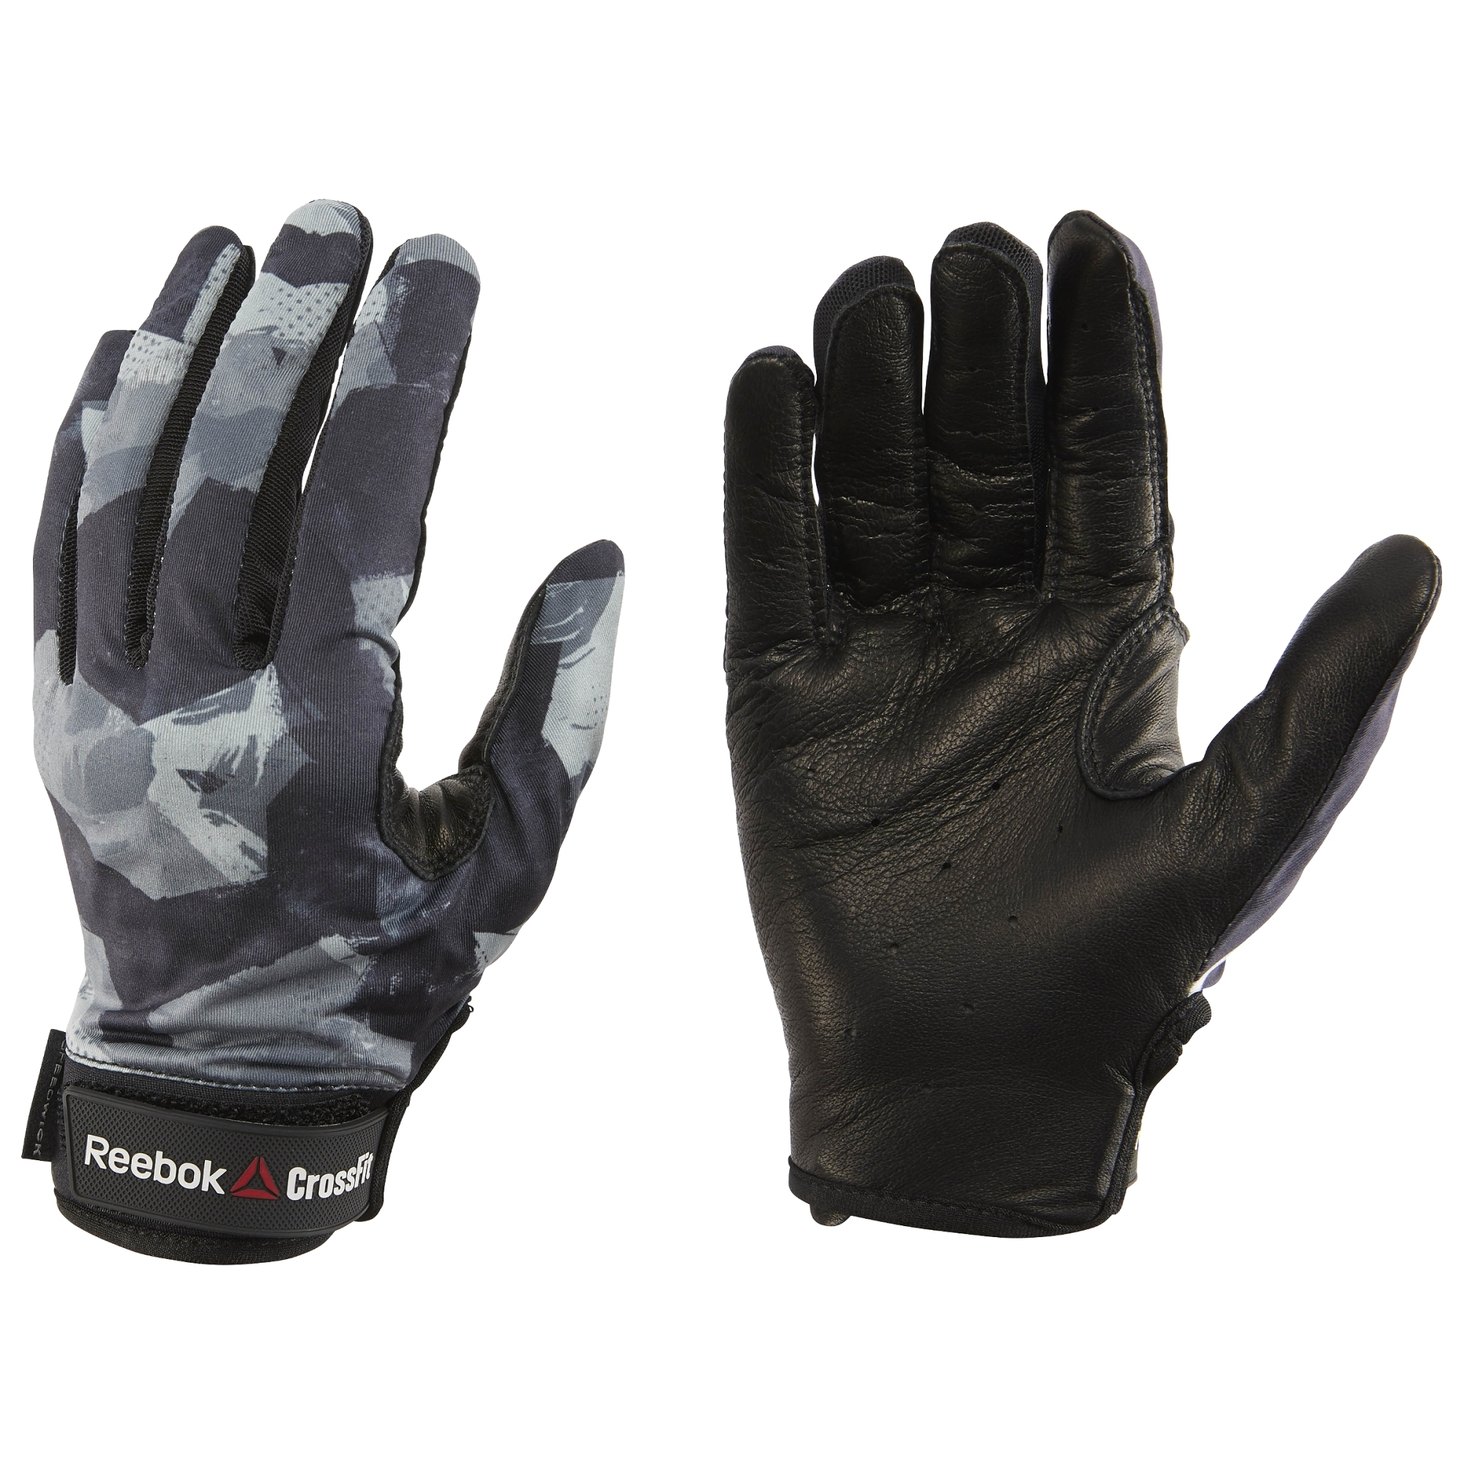 Reebok CrossFit Mens Competition Glove